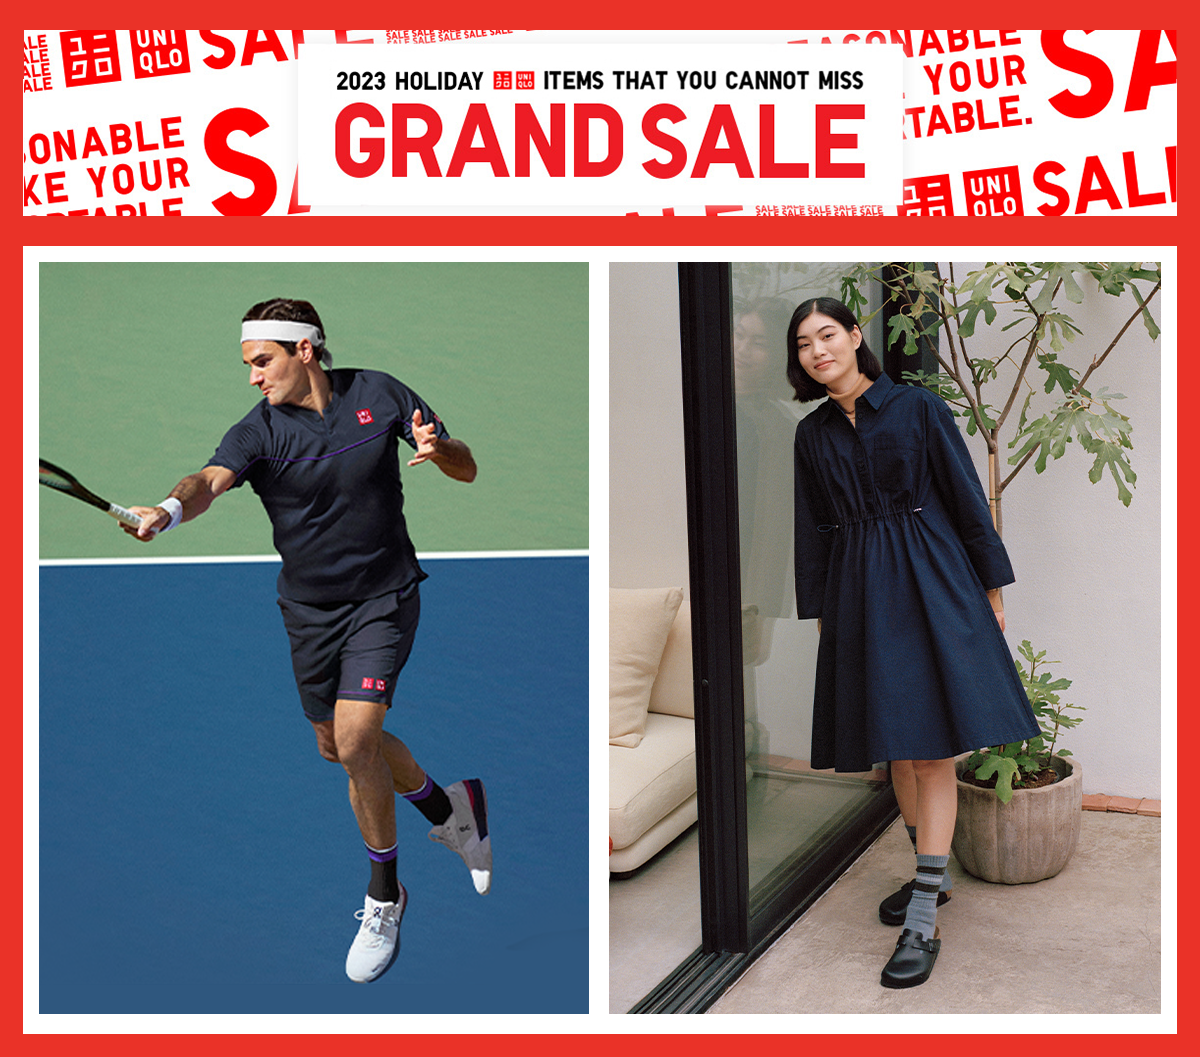 Roger Federer Uniqlo TShirt Collaboration Shop Charity Collab Online   Rolling Stone